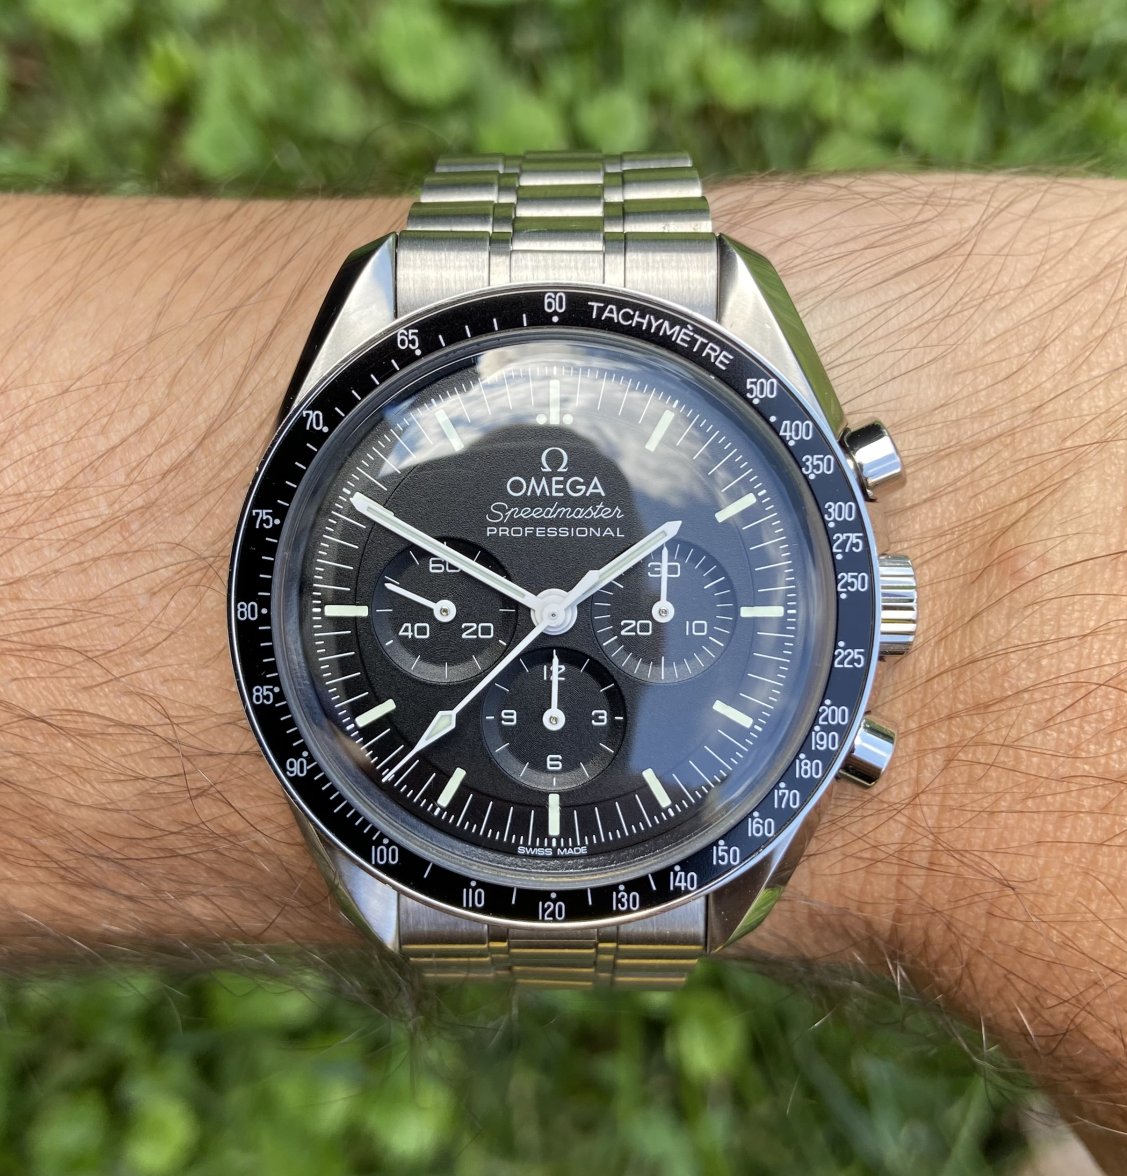 Omega - The new nylon strap fits the 1861..absolutely love Omega's